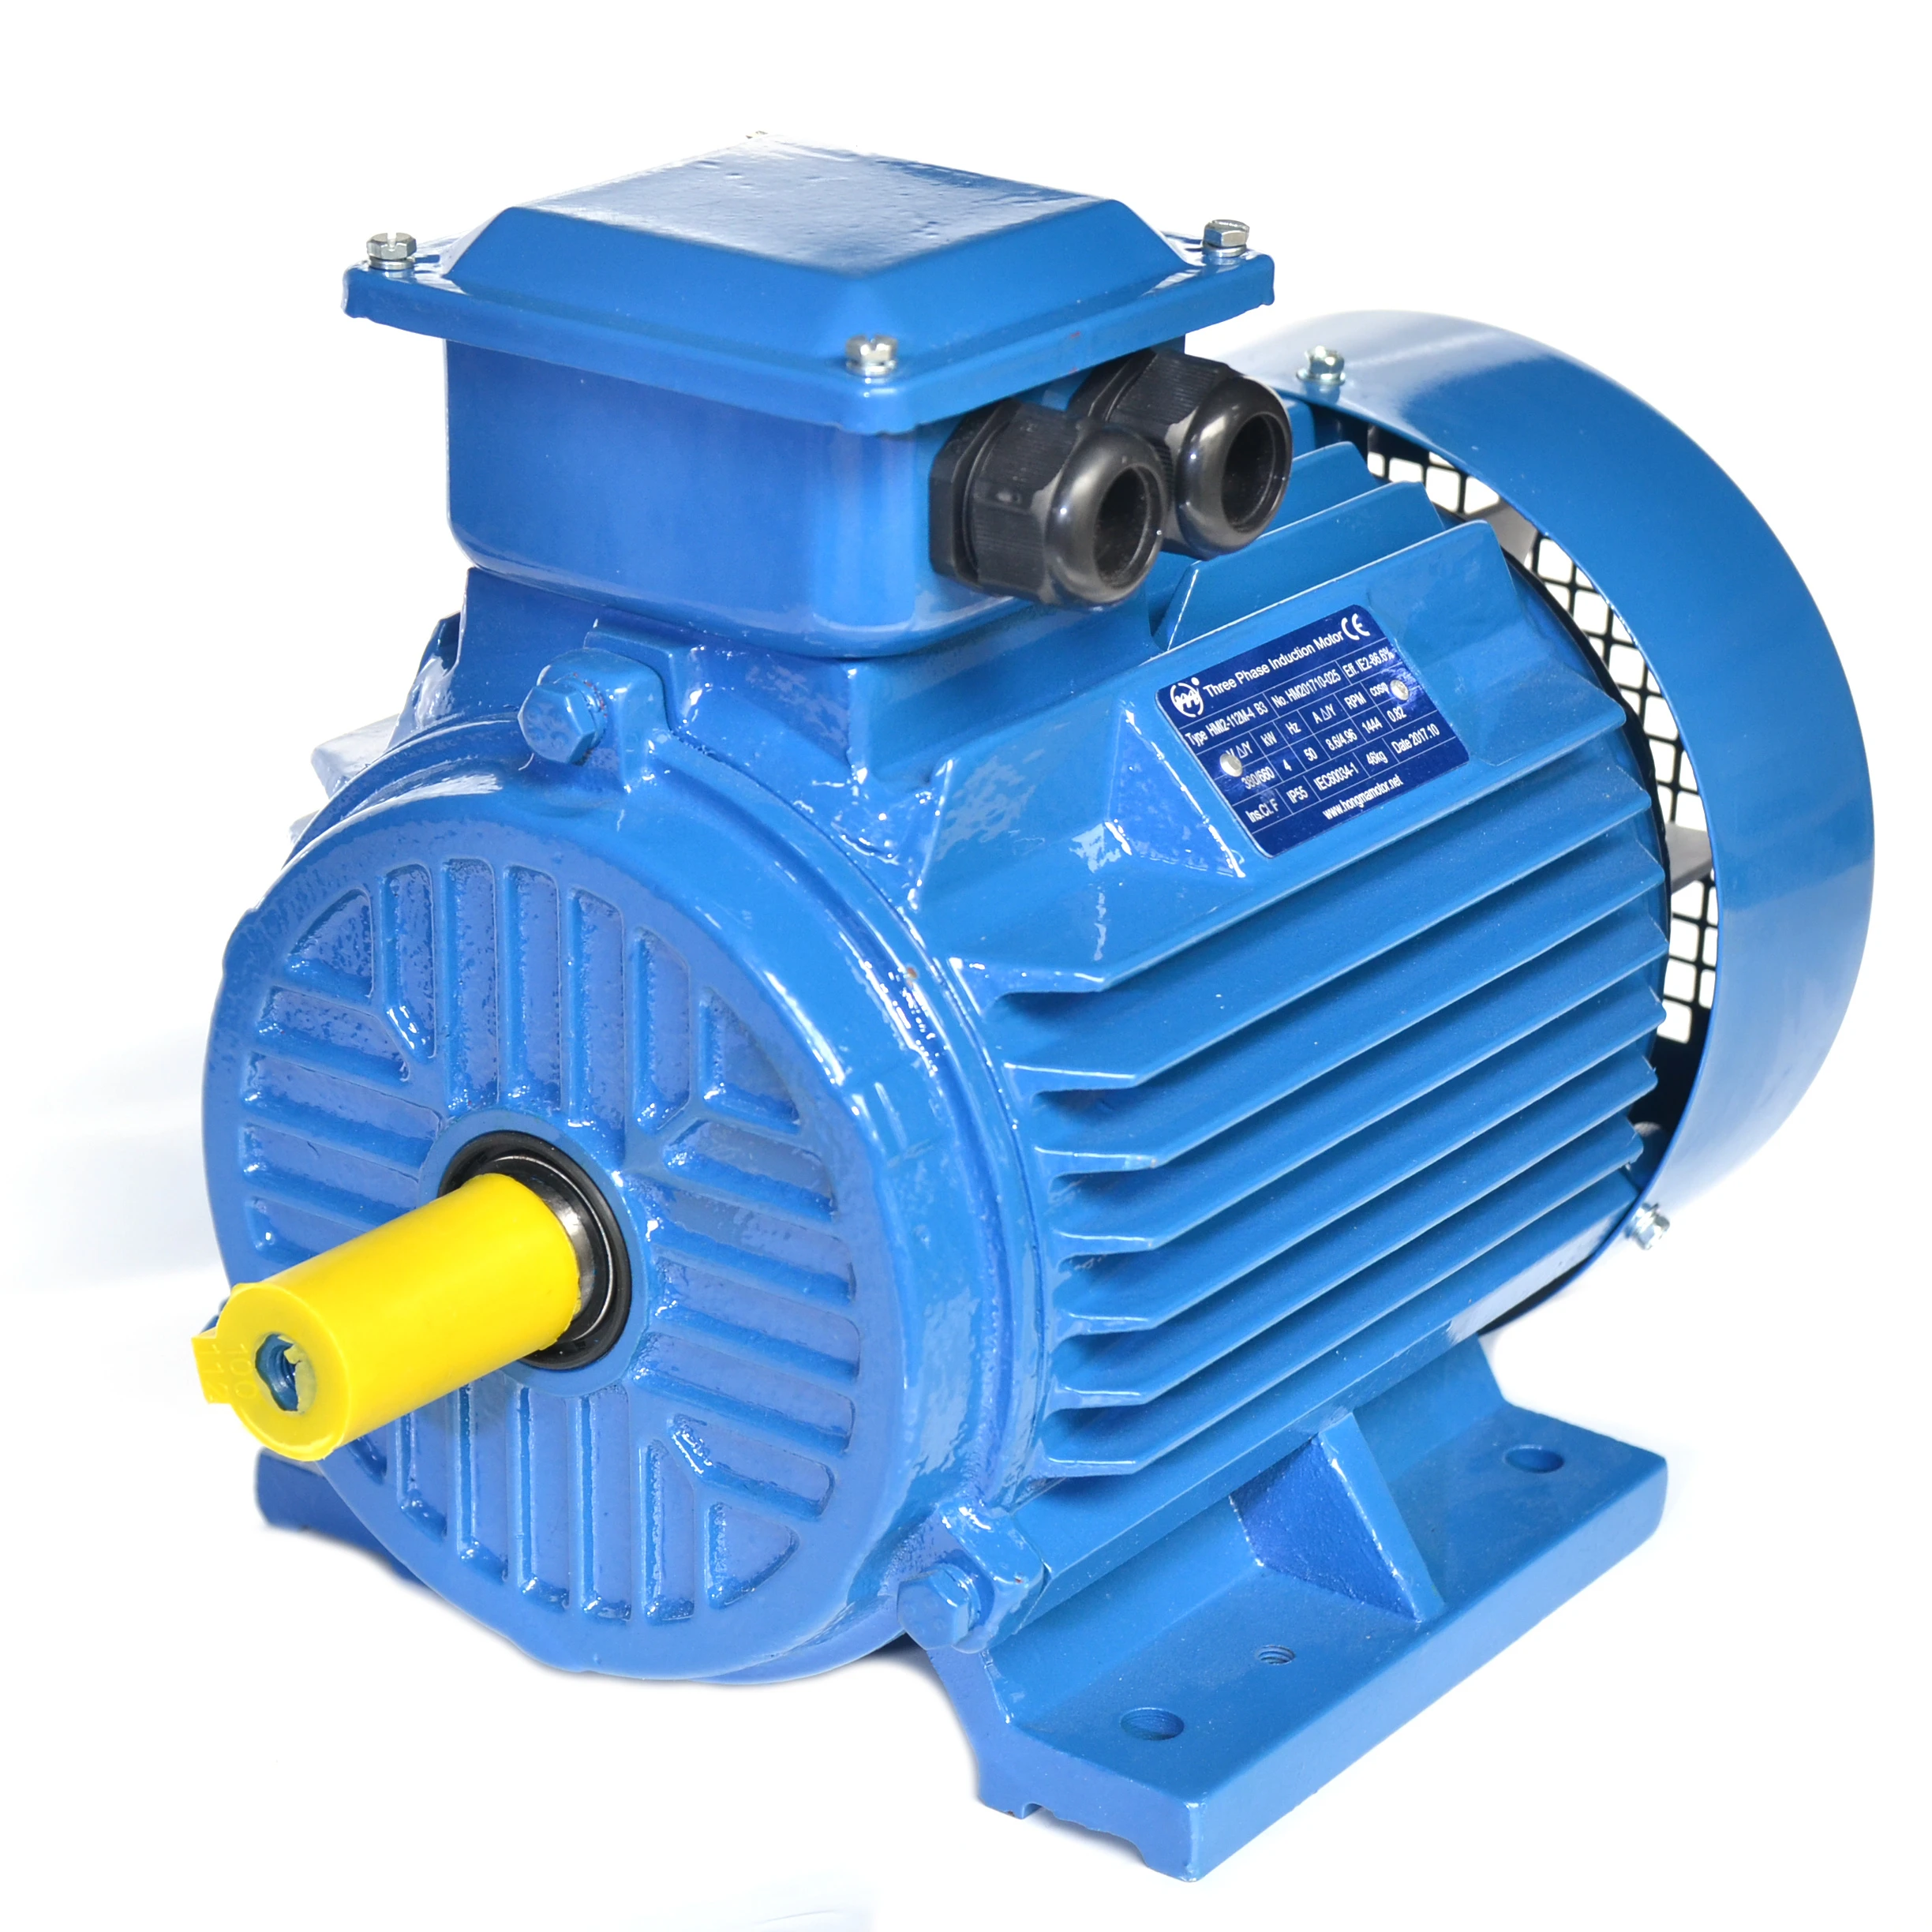 
Cast Iron IE2 electro 220V 3 phase ac induction motor with high Efficiency 